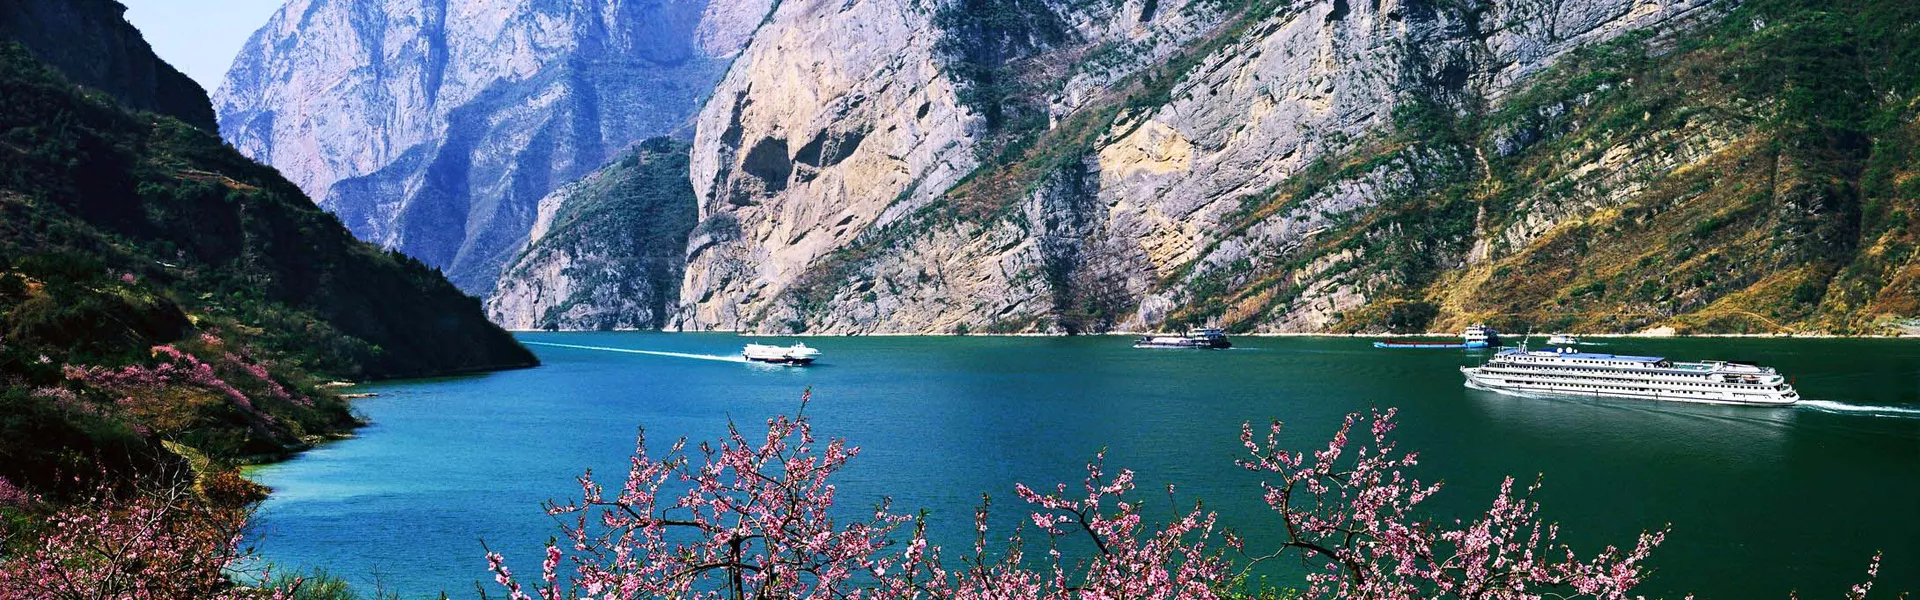 Yangtze Three Gorges in China, East Asia | Trekking & Hiking - Rated 0.7